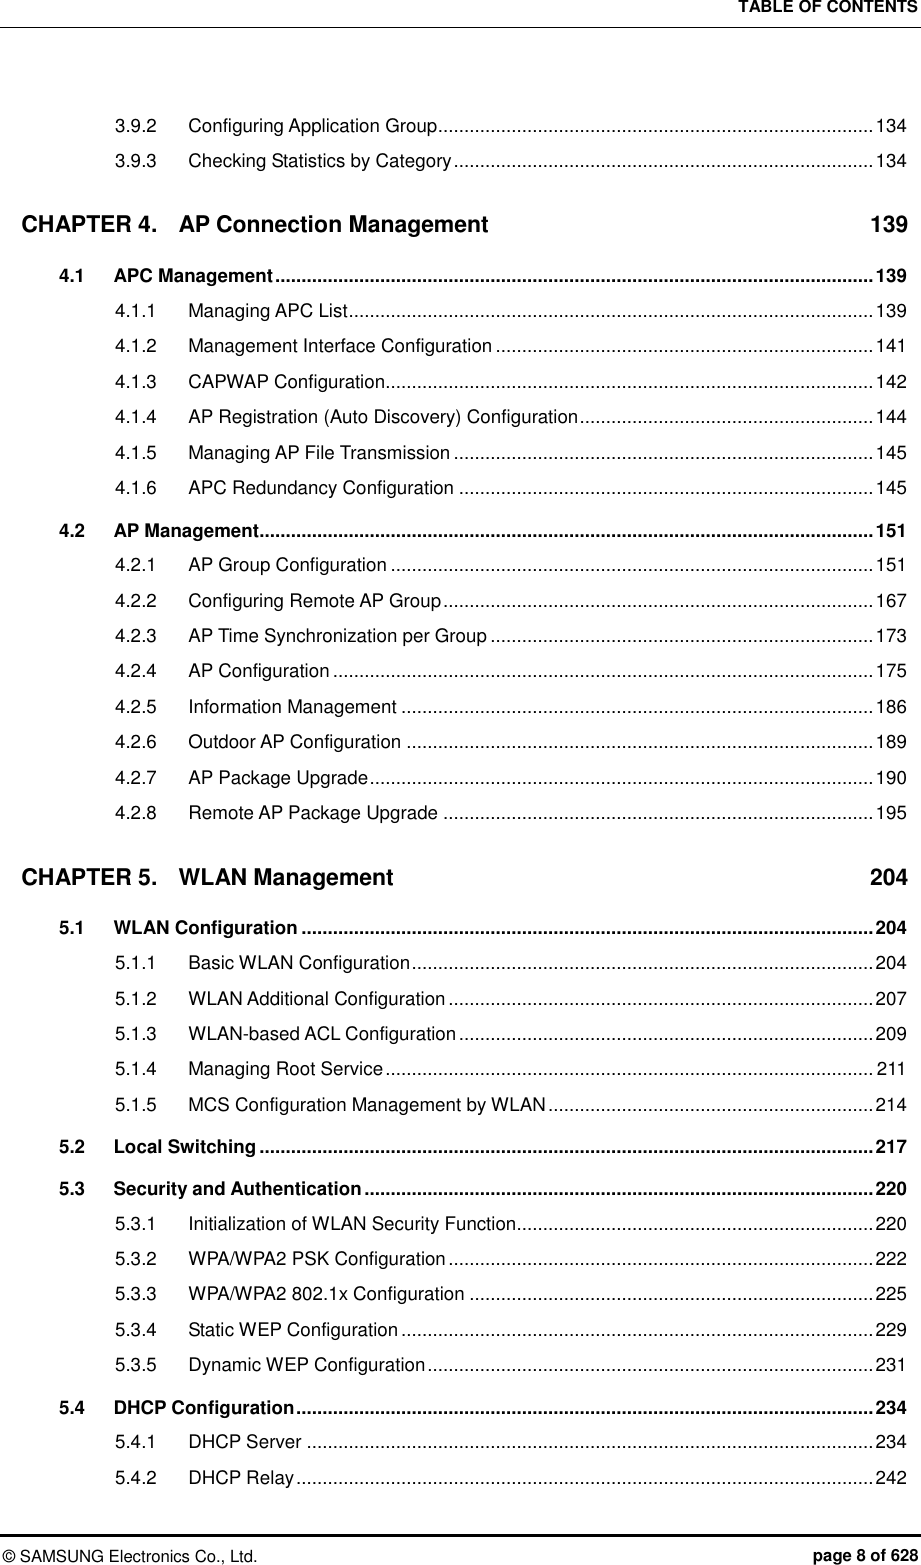 TABLE OF CONTENTS ©  SAMSUNG Electronics Co., Ltd.  page 8 of 628 3.9.2 Configuring Application Group ................................................................................... 134 3.9.3 Checking Statistics by Category ................................................................................ 134 CHAPTER 4. AP Connection Management  139 4.1 APC Management .................................................................................................................. 139 4.1.1 Managing APC List .................................................................................................... 139 4.1.2 Management Interface Configuration ........................................................................ 141 4.1.3 CAPWAP Configuration............................................................................................. 142 4.1.4 AP Registration (Auto Discovery) Configuration ........................................................ 144 4.1.5 Managing AP File Transmission ................................................................................ 145 4.1.6 APC Redundancy Configuration ............................................................................... 145 4.2 AP Management ..................................................................................................................... 151 4.2.1 AP Group Configuration ............................................................................................ 151 4.2.2 Configuring Remote AP Group .................................................................................. 167 4.2.3 AP Time Synchronization per Group ......................................................................... 173 4.2.4 AP Configuration ....................................................................................................... 175 4.2.5 Information Management .......................................................................................... 186 4.2.6 Outdoor AP Configuration ......................................................................................... 189 4.2.7 AP Package Upgrade ................................................................................................ 190 4.2.8 Remote AP Package Upgrade .................................................................................. 195 CHAPTER 5. WLAN Management  204 5.1 WLAN Configuration ............................................................................................................. 204 5.1.1 Basic WLAN Configuration ........................................................................................ 204 5.1.2 WLAN Additional Configuration ................................................................................. 207 5.1.3 WLAN-based ACL Configuration ............................................................................... 209 5.1.4 Managing Root Service ............................................................................................. 211 5.1.5 MCS Configuration Management by WLAN .............................................................. 214 5.2 Local Switching ..................................................................................................................... 217 5.3 Security and Authentication ................................................................................................. 220 5.3.1 Initialization of WLAN Security Function.................................................................... 220 5.3.2 WPA/WPA2 PSK Configuration ................................................................................. 222 5.3.3 WPA/WPA2 802.1x Configuration ............................................................................. 225 5.3.4 Static WEP Configuration .......................................................................................... 229 5.3.5 Dynamic WEP Configuration ..................................................................................... 231 5.4 DHCP Configuration .............................................................................................................. 234 5.4.1 DHCP Server ............................................................................................................ 234 5.4.2 DHCP Relay .............................................................................................................. 242 